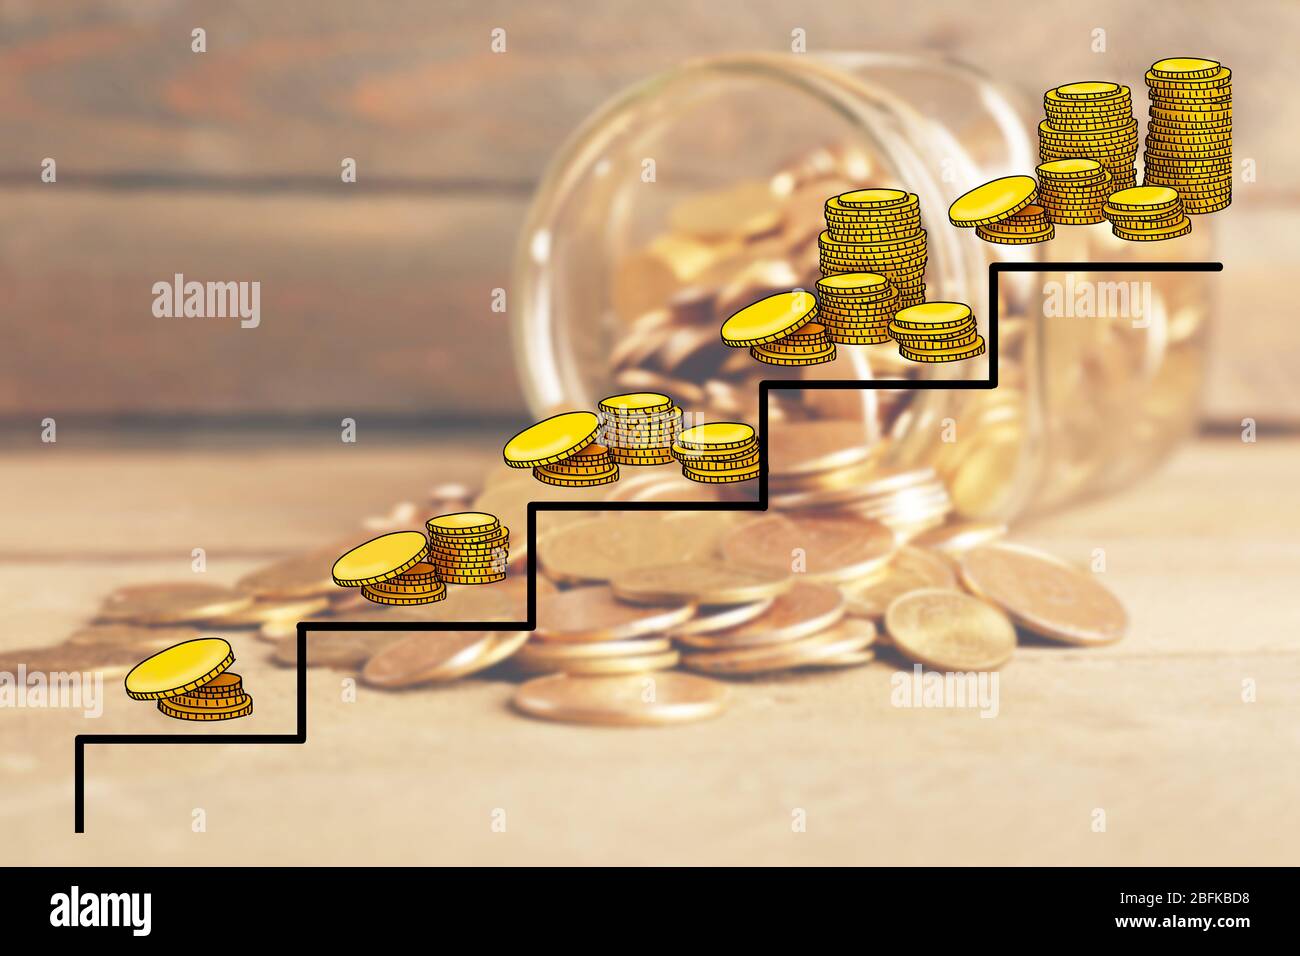 Money concept. Glass jar with coins Stock Photo